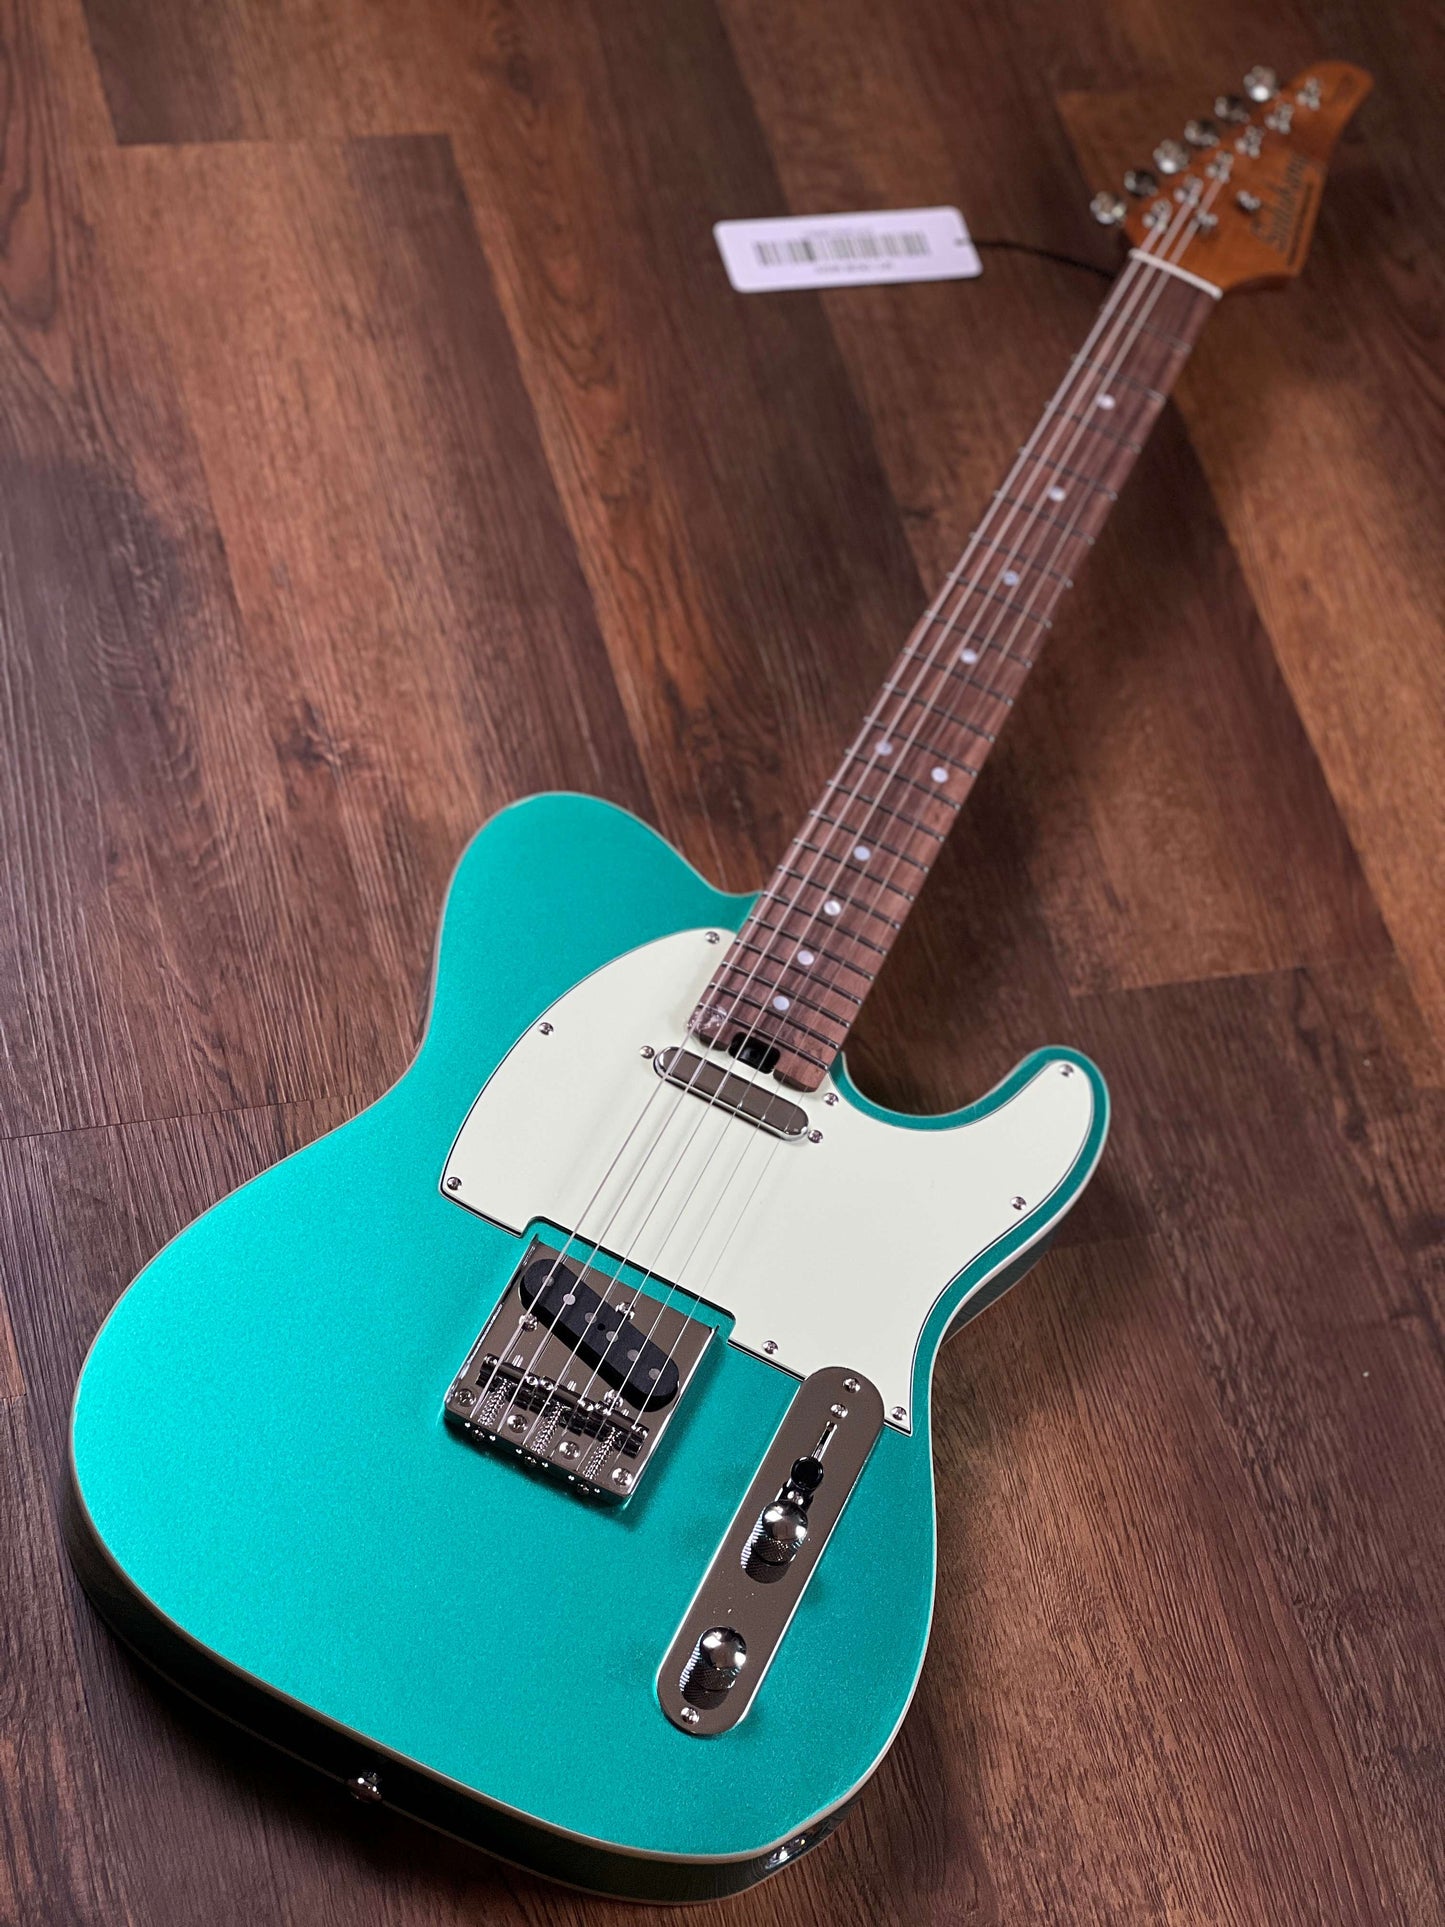 Soloking T-1B Vintage MKII with Roasted Maple Neck and Rosewood FB in Sherwood Green Metallic